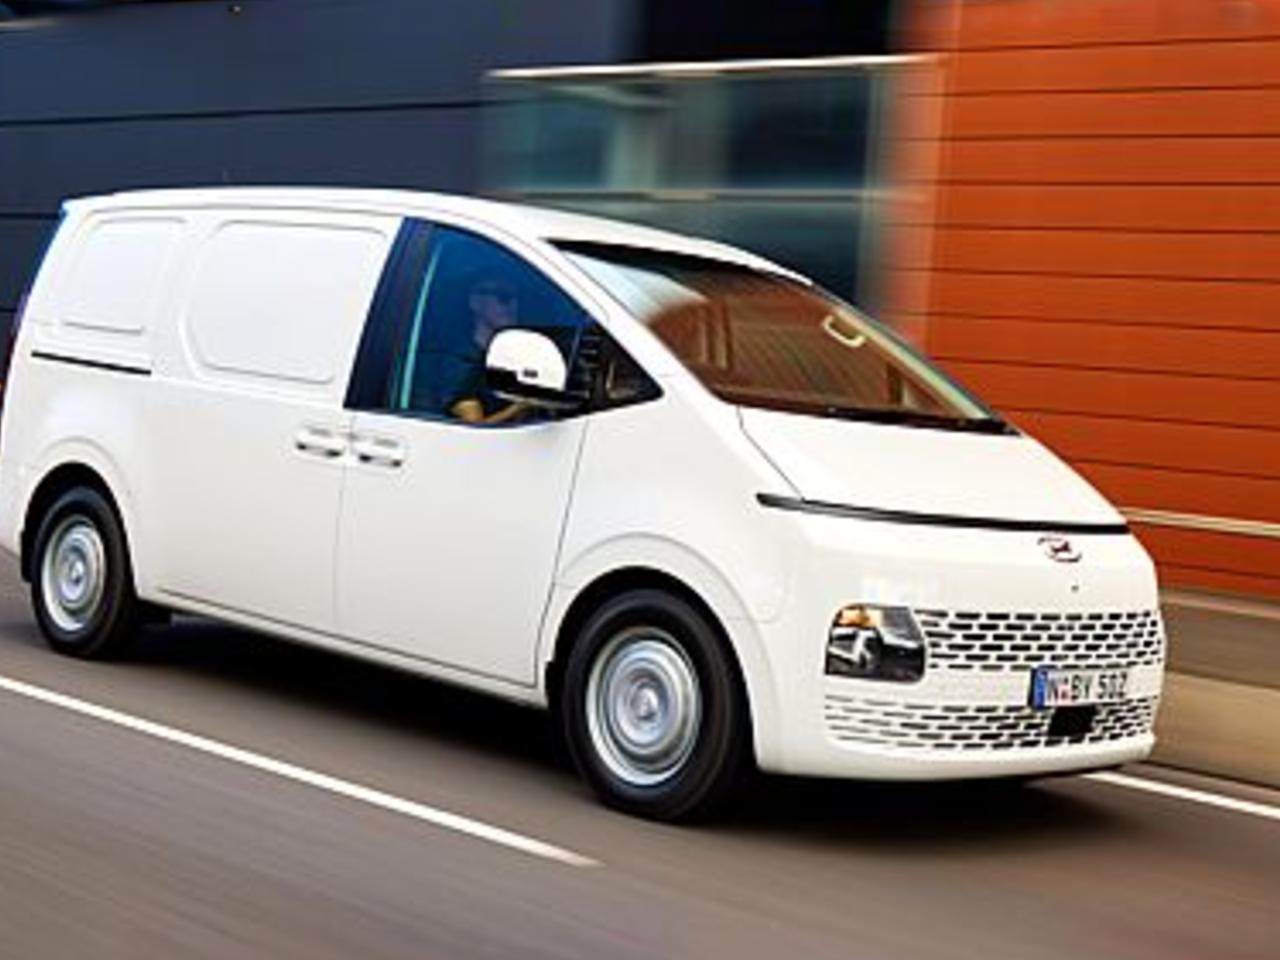 Hyundai Challenges Toyota in the Van Market with Staria Load